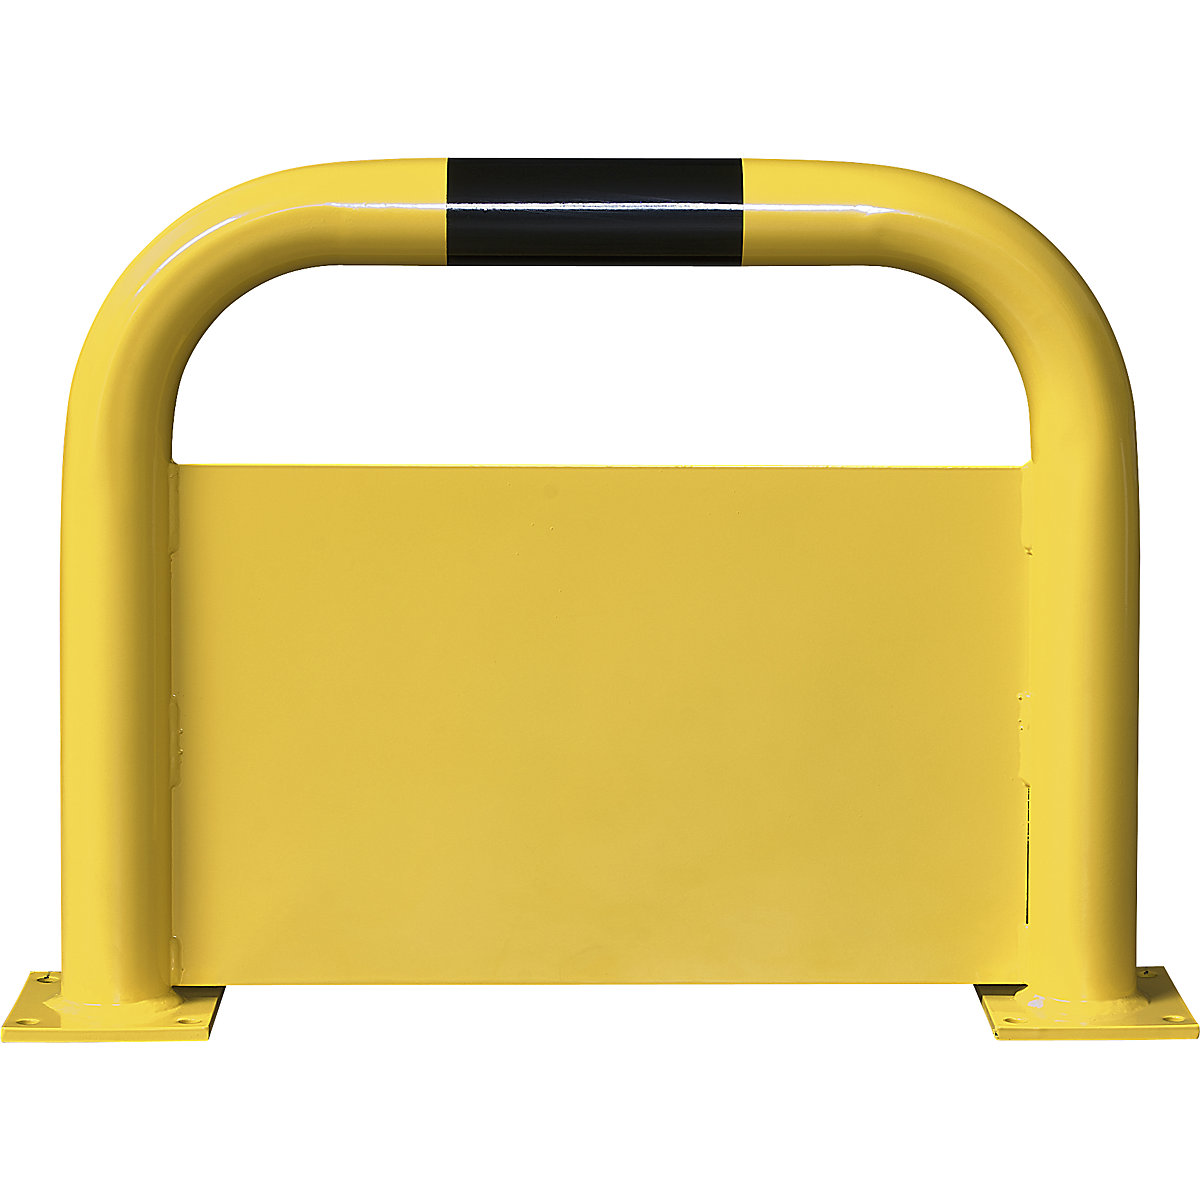 Crash protection bar with forklift guard